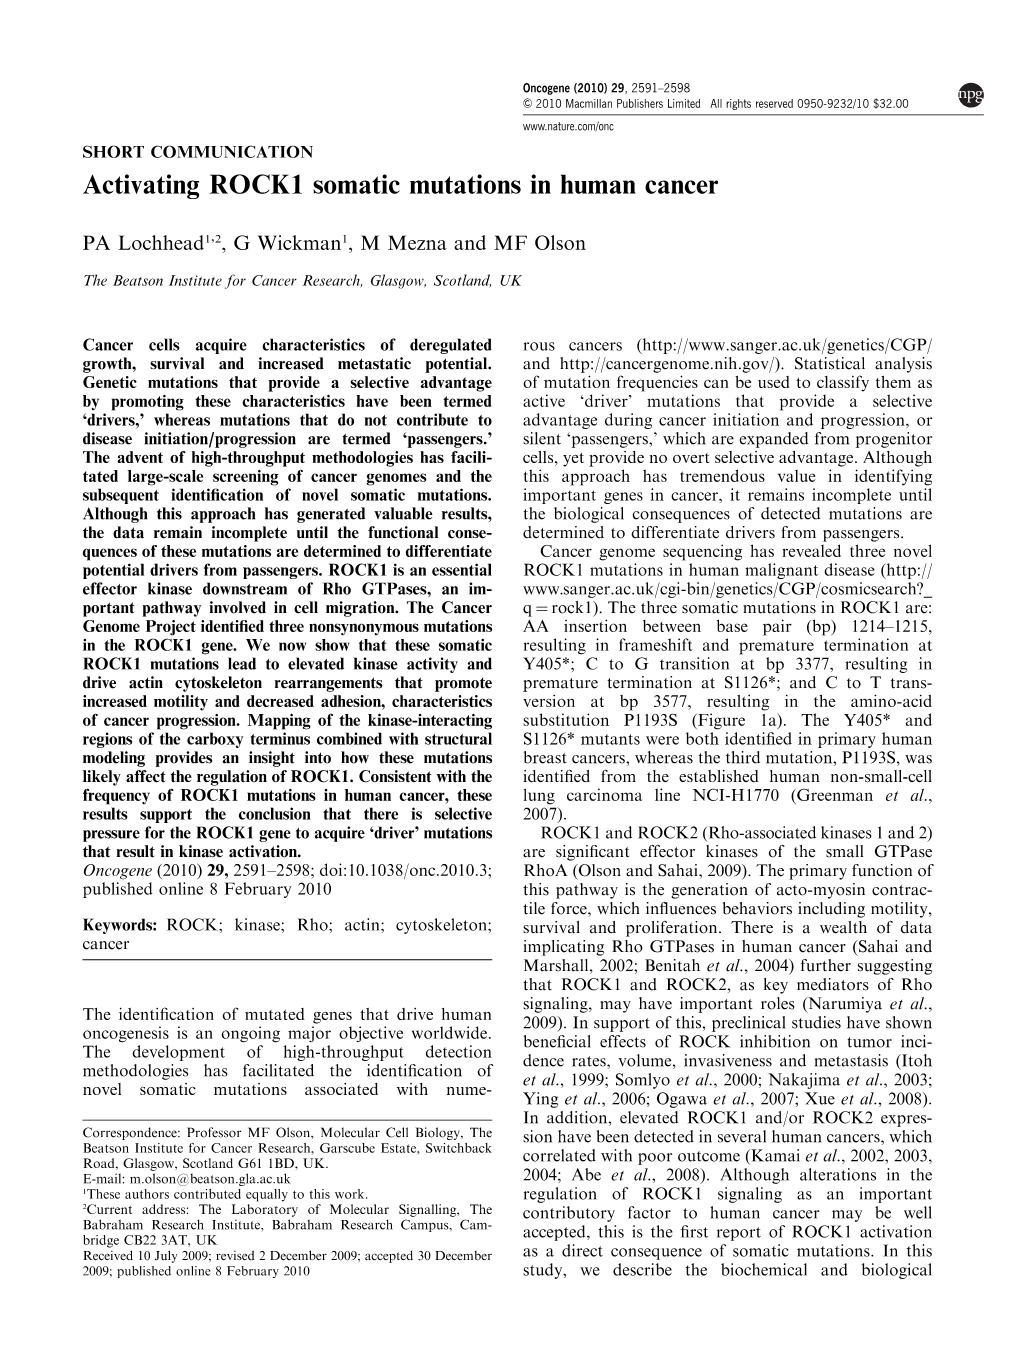 Activating ROCK1 Somatic Mutations in Human Cancer